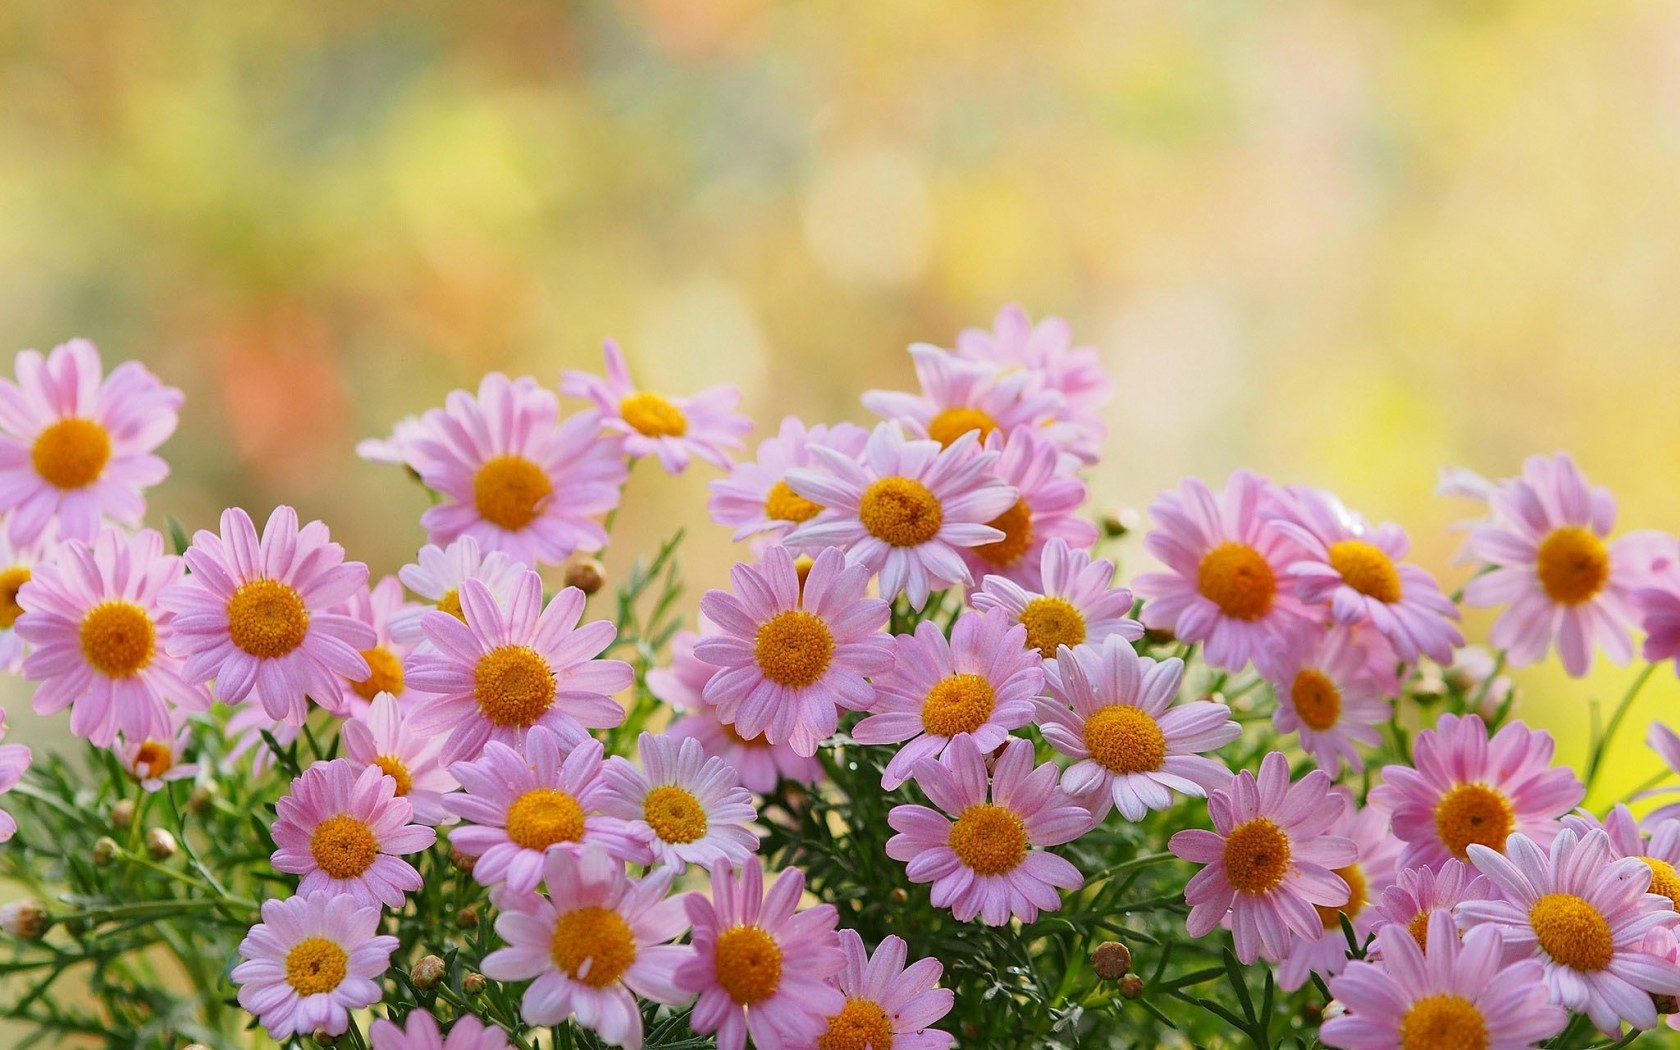 camomile, earth, daisy, flower, pink flower, flowers